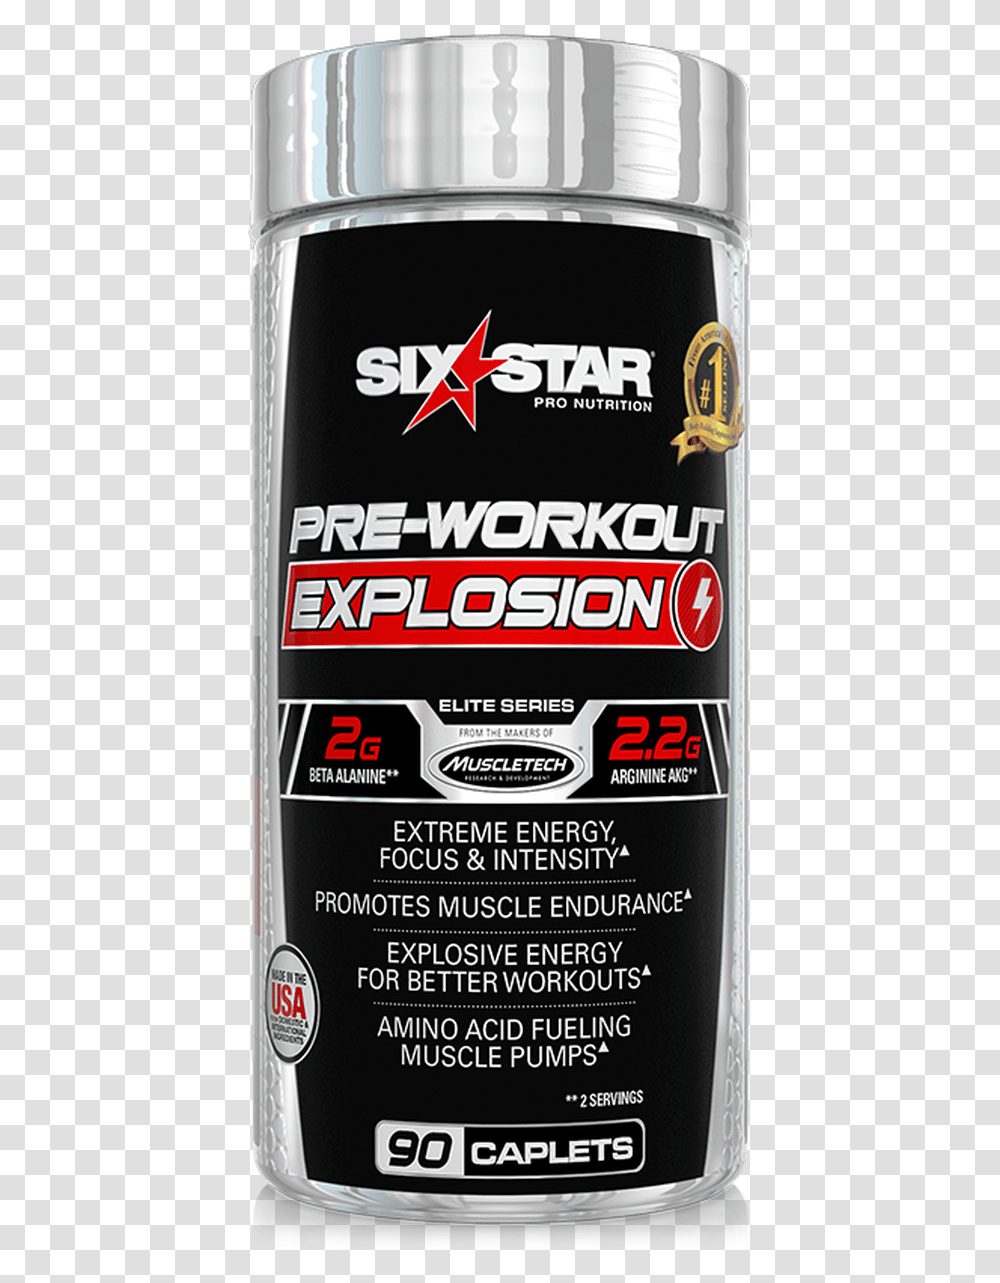 Pre Workout Explosion Pill Six Star Pre Workout Explosion, Mobile Phone, Electronics, Beer, Alcohol Transparent Png